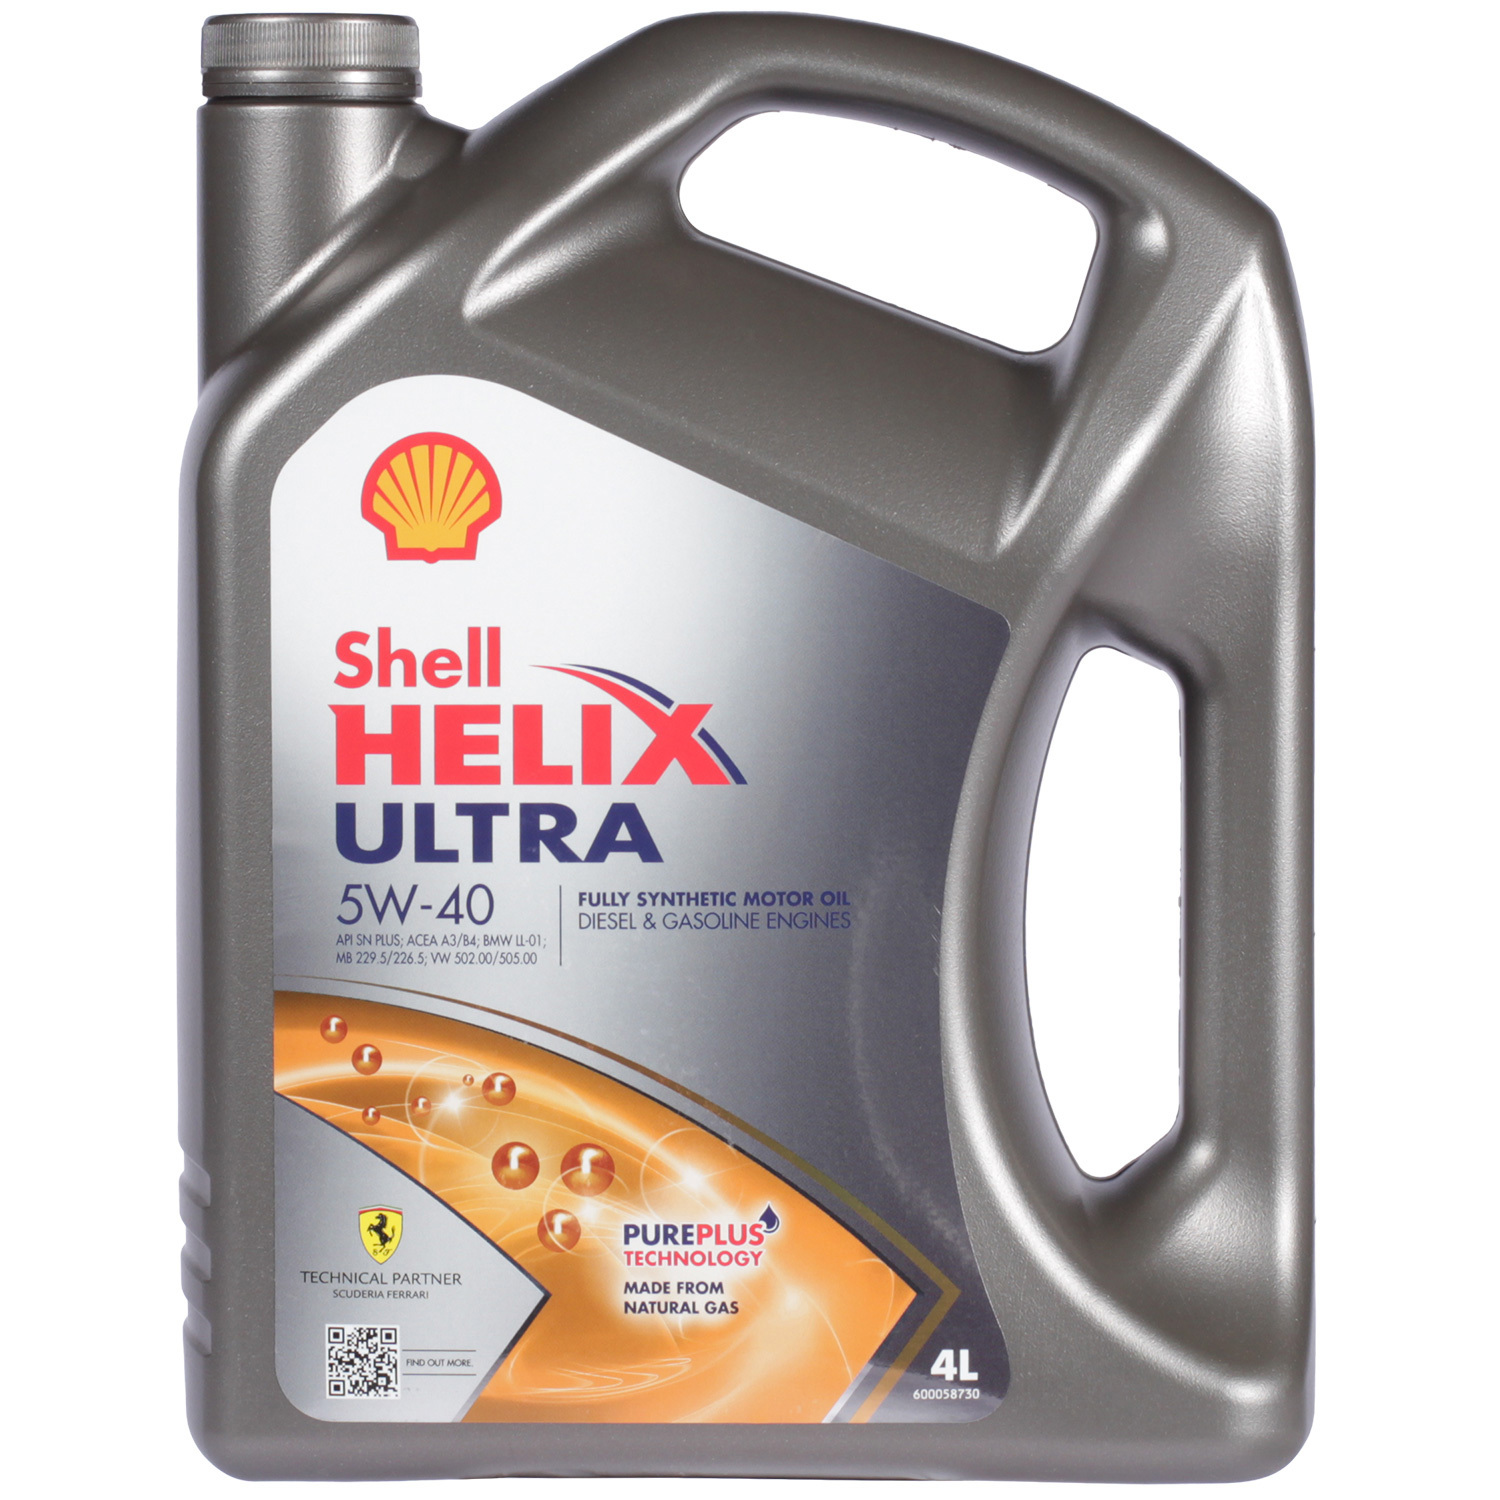 Shell Моторное масло Shell Helix Ultra 5W-40, 4 л масло моторное shell helix ultra 5w 30 4 л